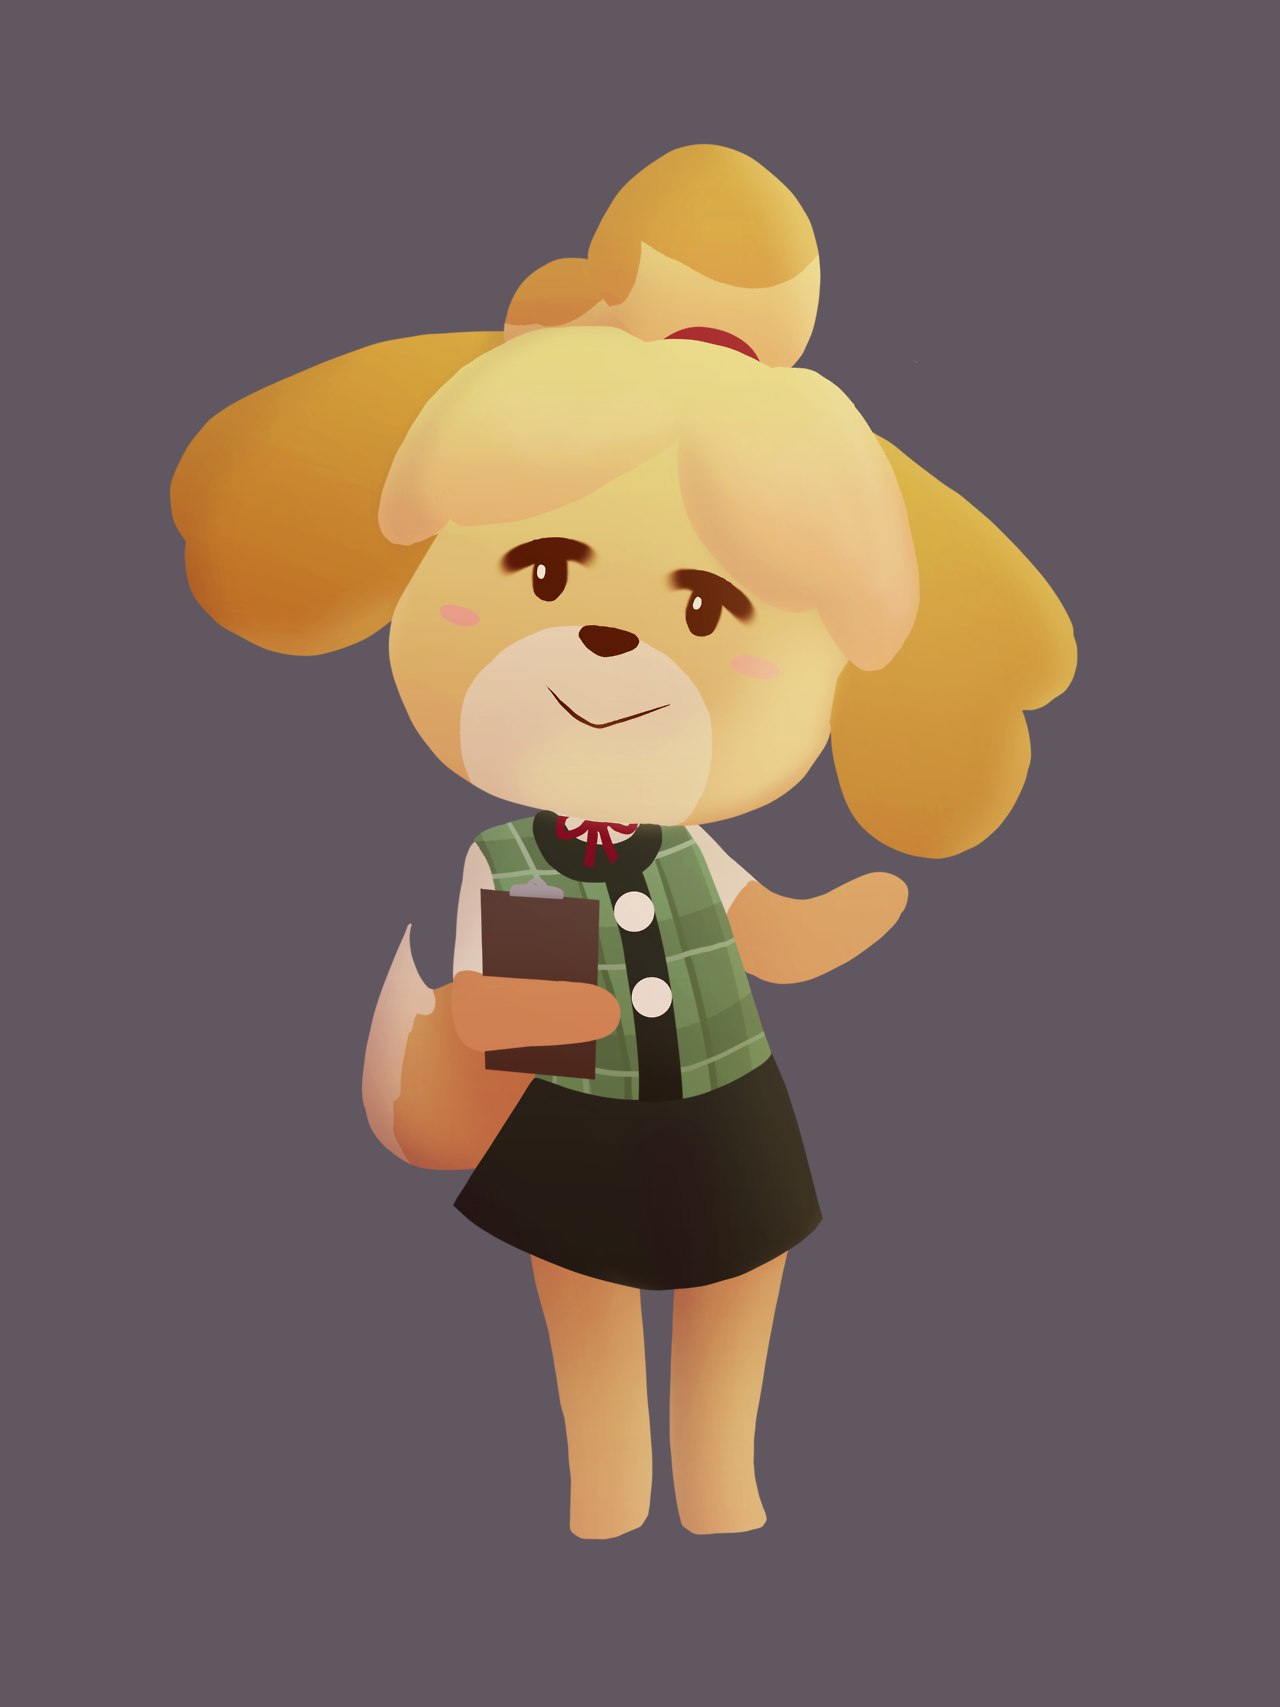 Pilot-Obvious — It's Isabelle from Animal Crossing!